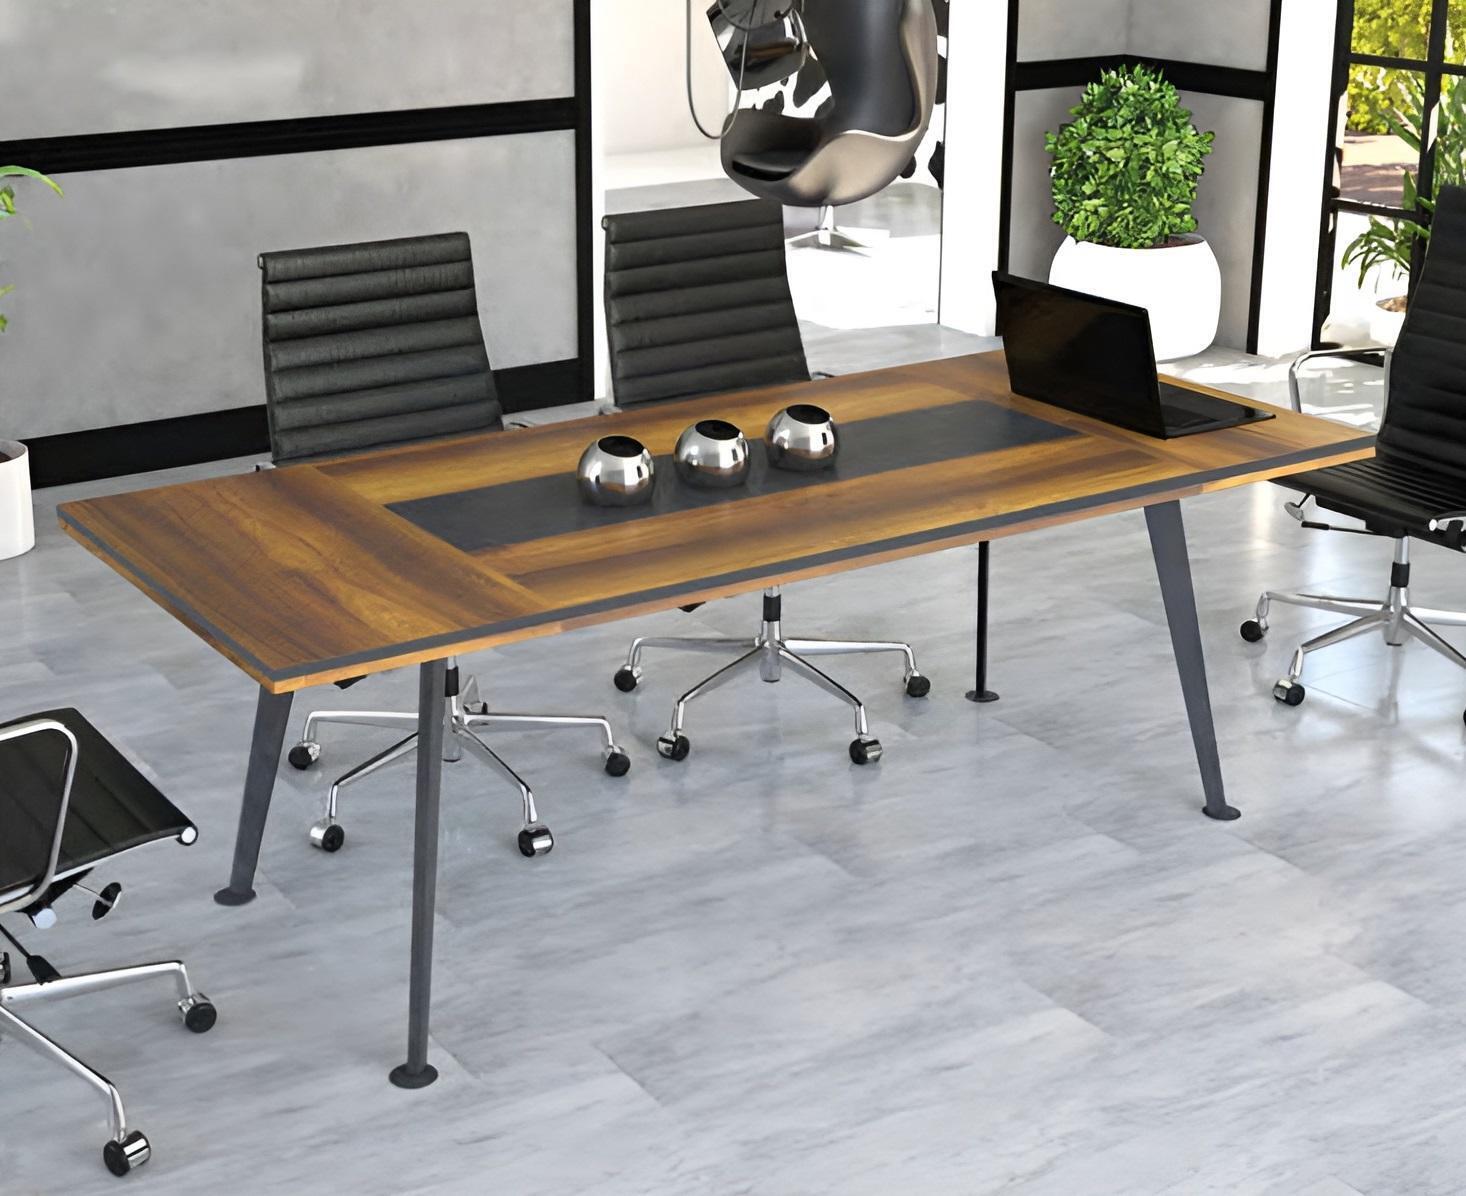 Conference table meeting tables conference furniture large table brown wood